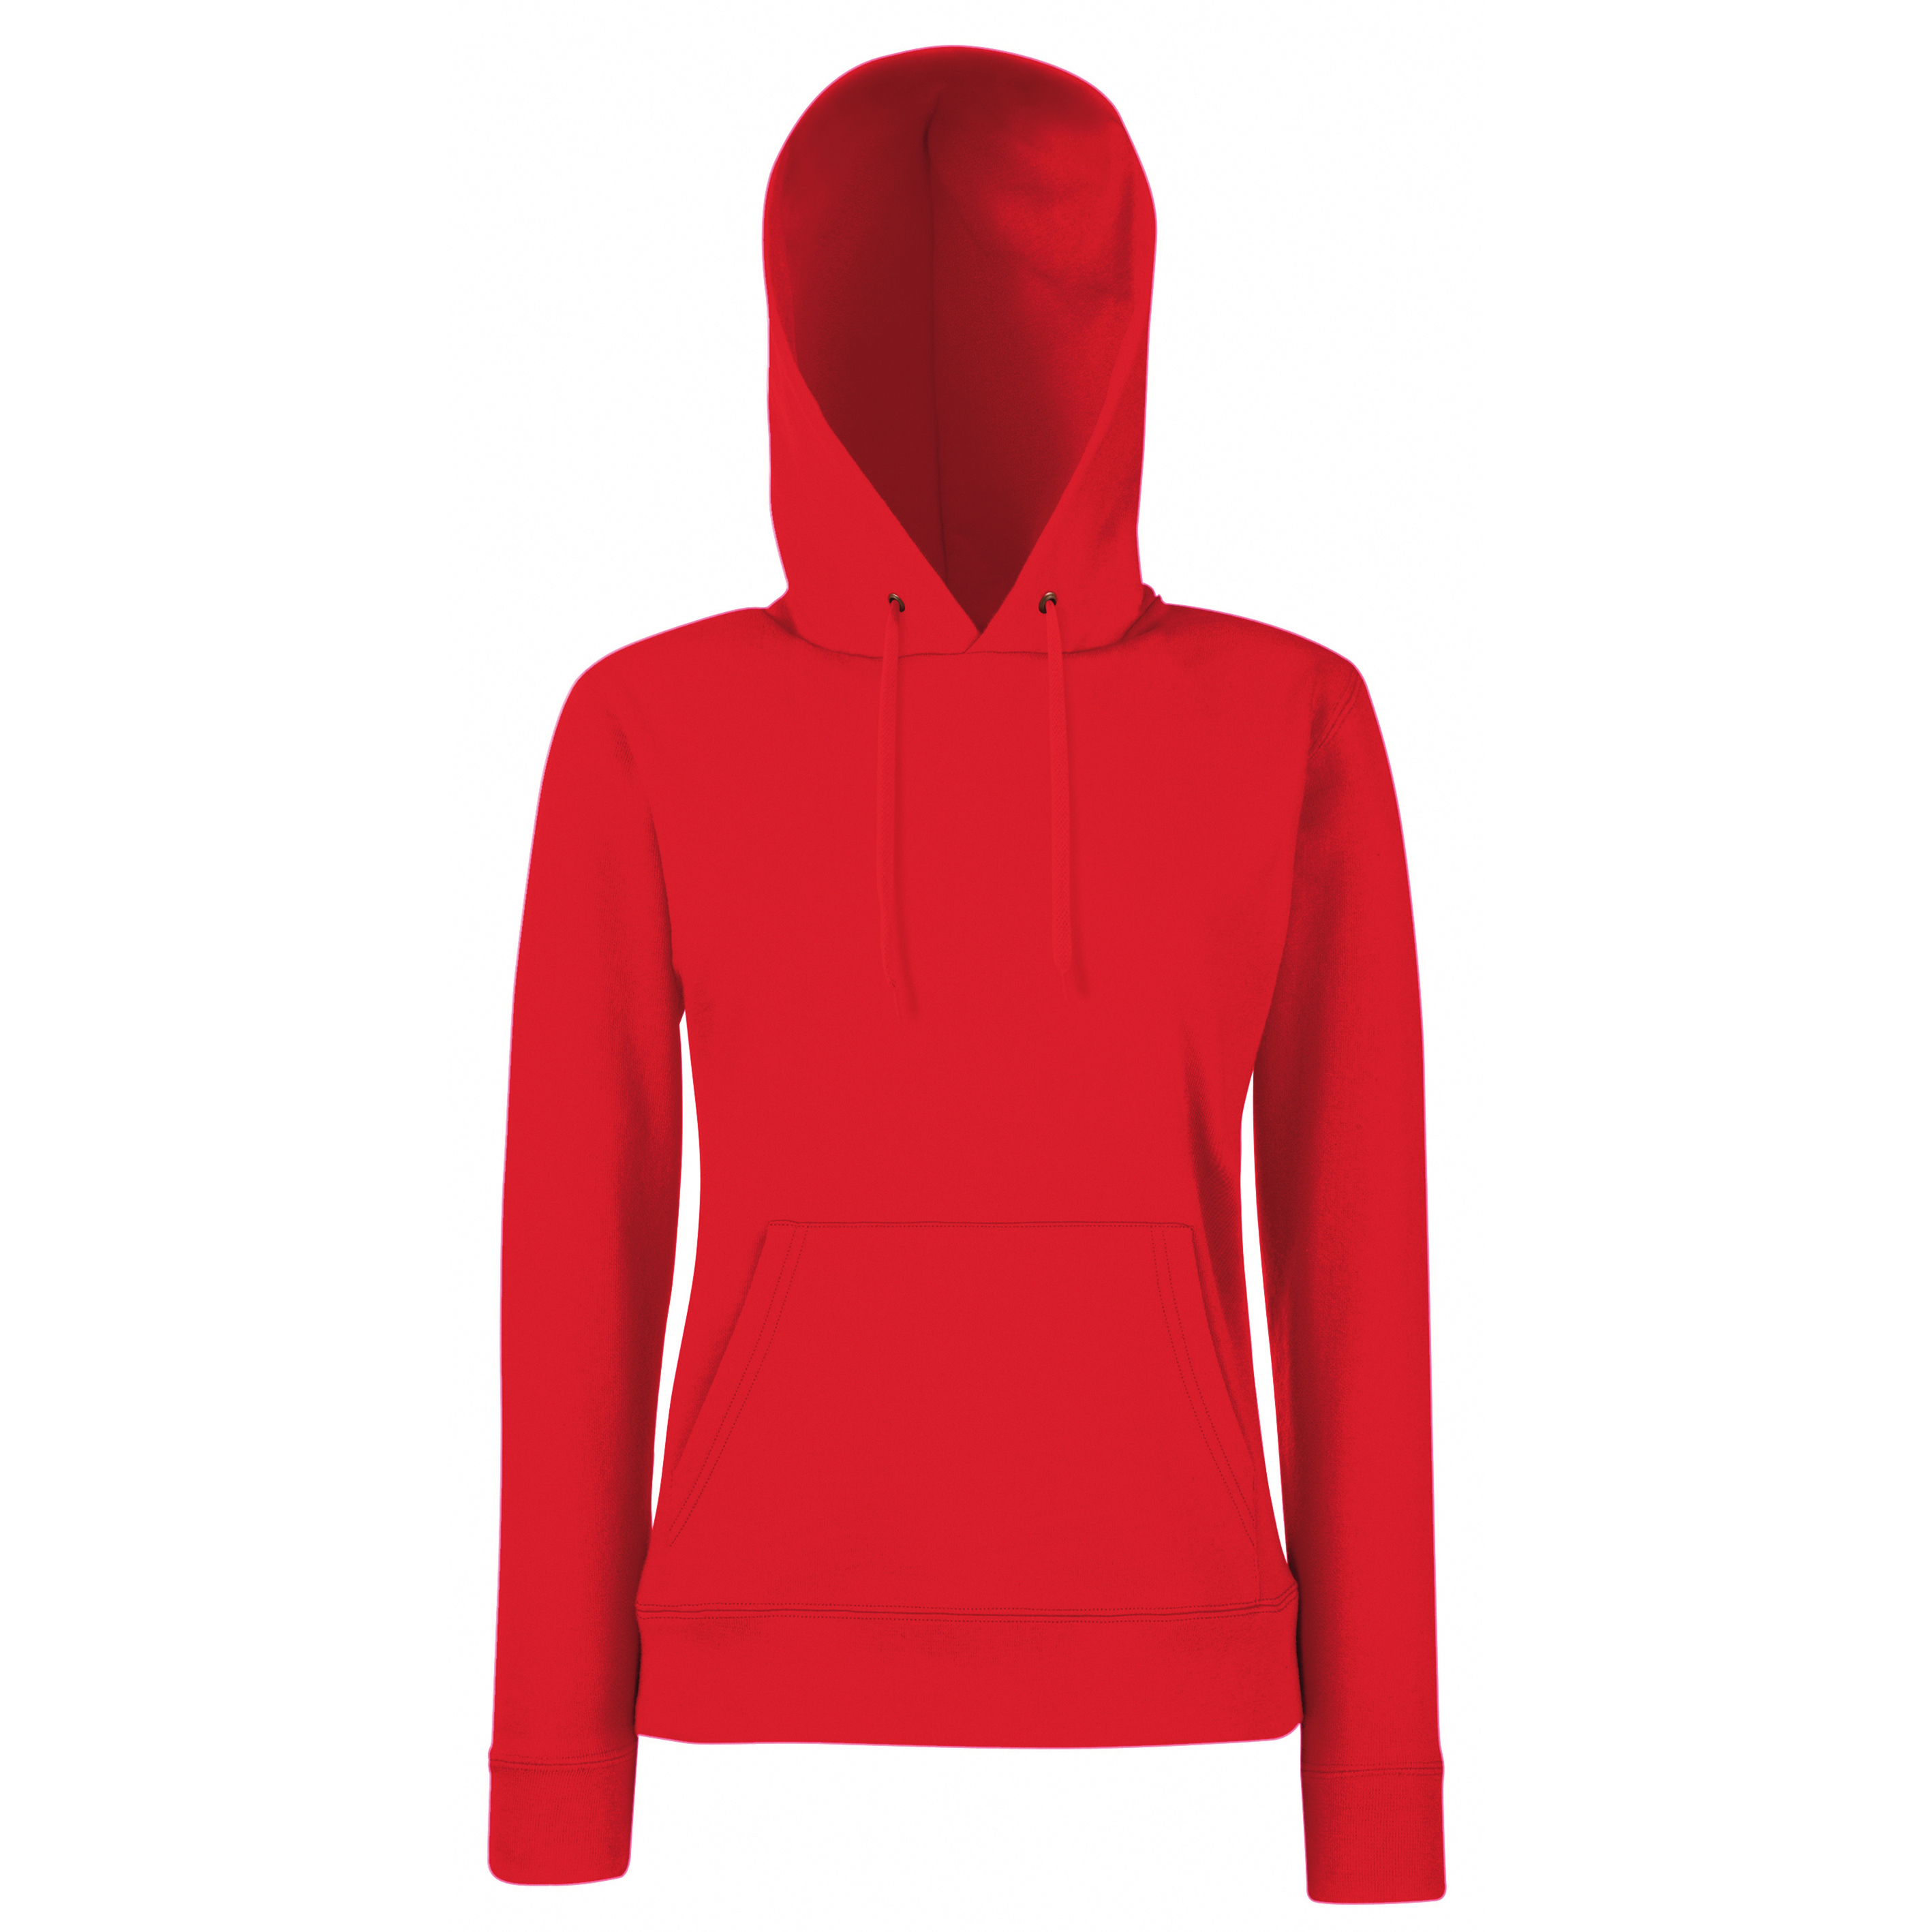 ax-httpswebsystems.s3.amazonaws.comtmp_for_downloadfruit-of-the-loom-womens-classic-80-20-hooded-sweatshirt-red.jpeg